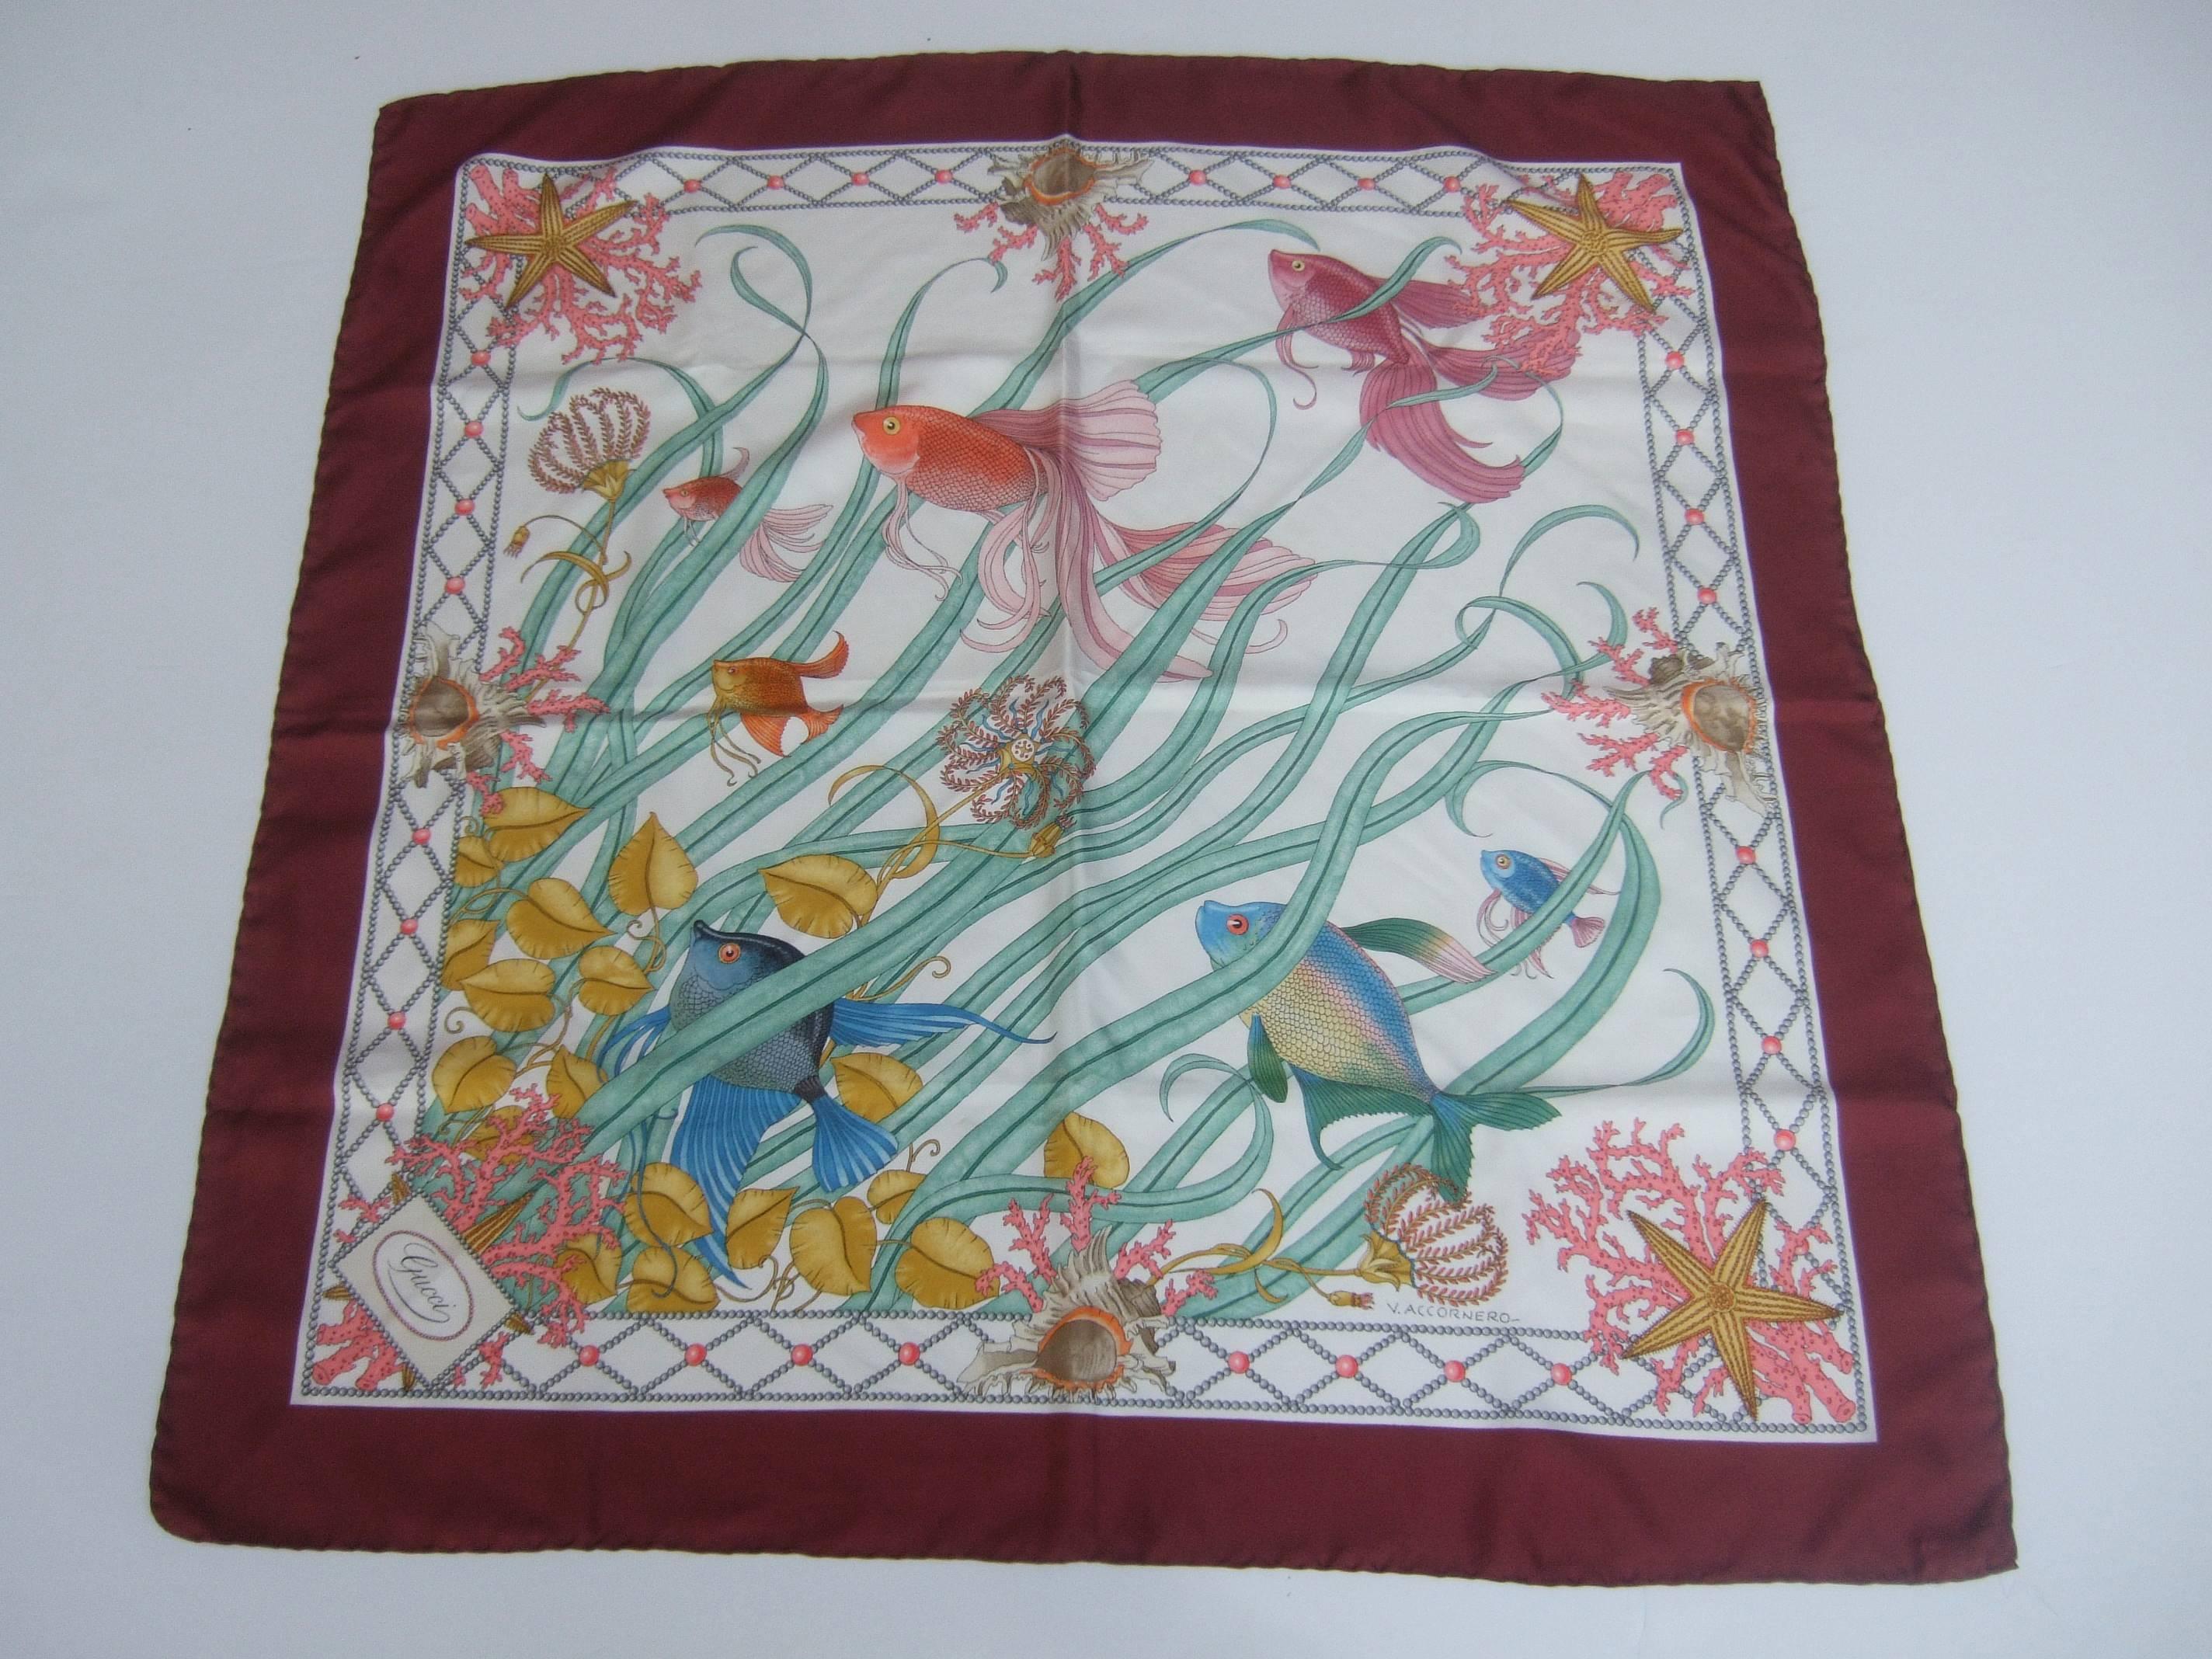 Gucci Italy Luxurious large sea life illustrated scarf 
The elegant sumptuous silk scarf is designed
with schools of tropical fish navigating thru
sinuous green foliage

The exotic fish are surrounded by conch 
shells, coral branches and